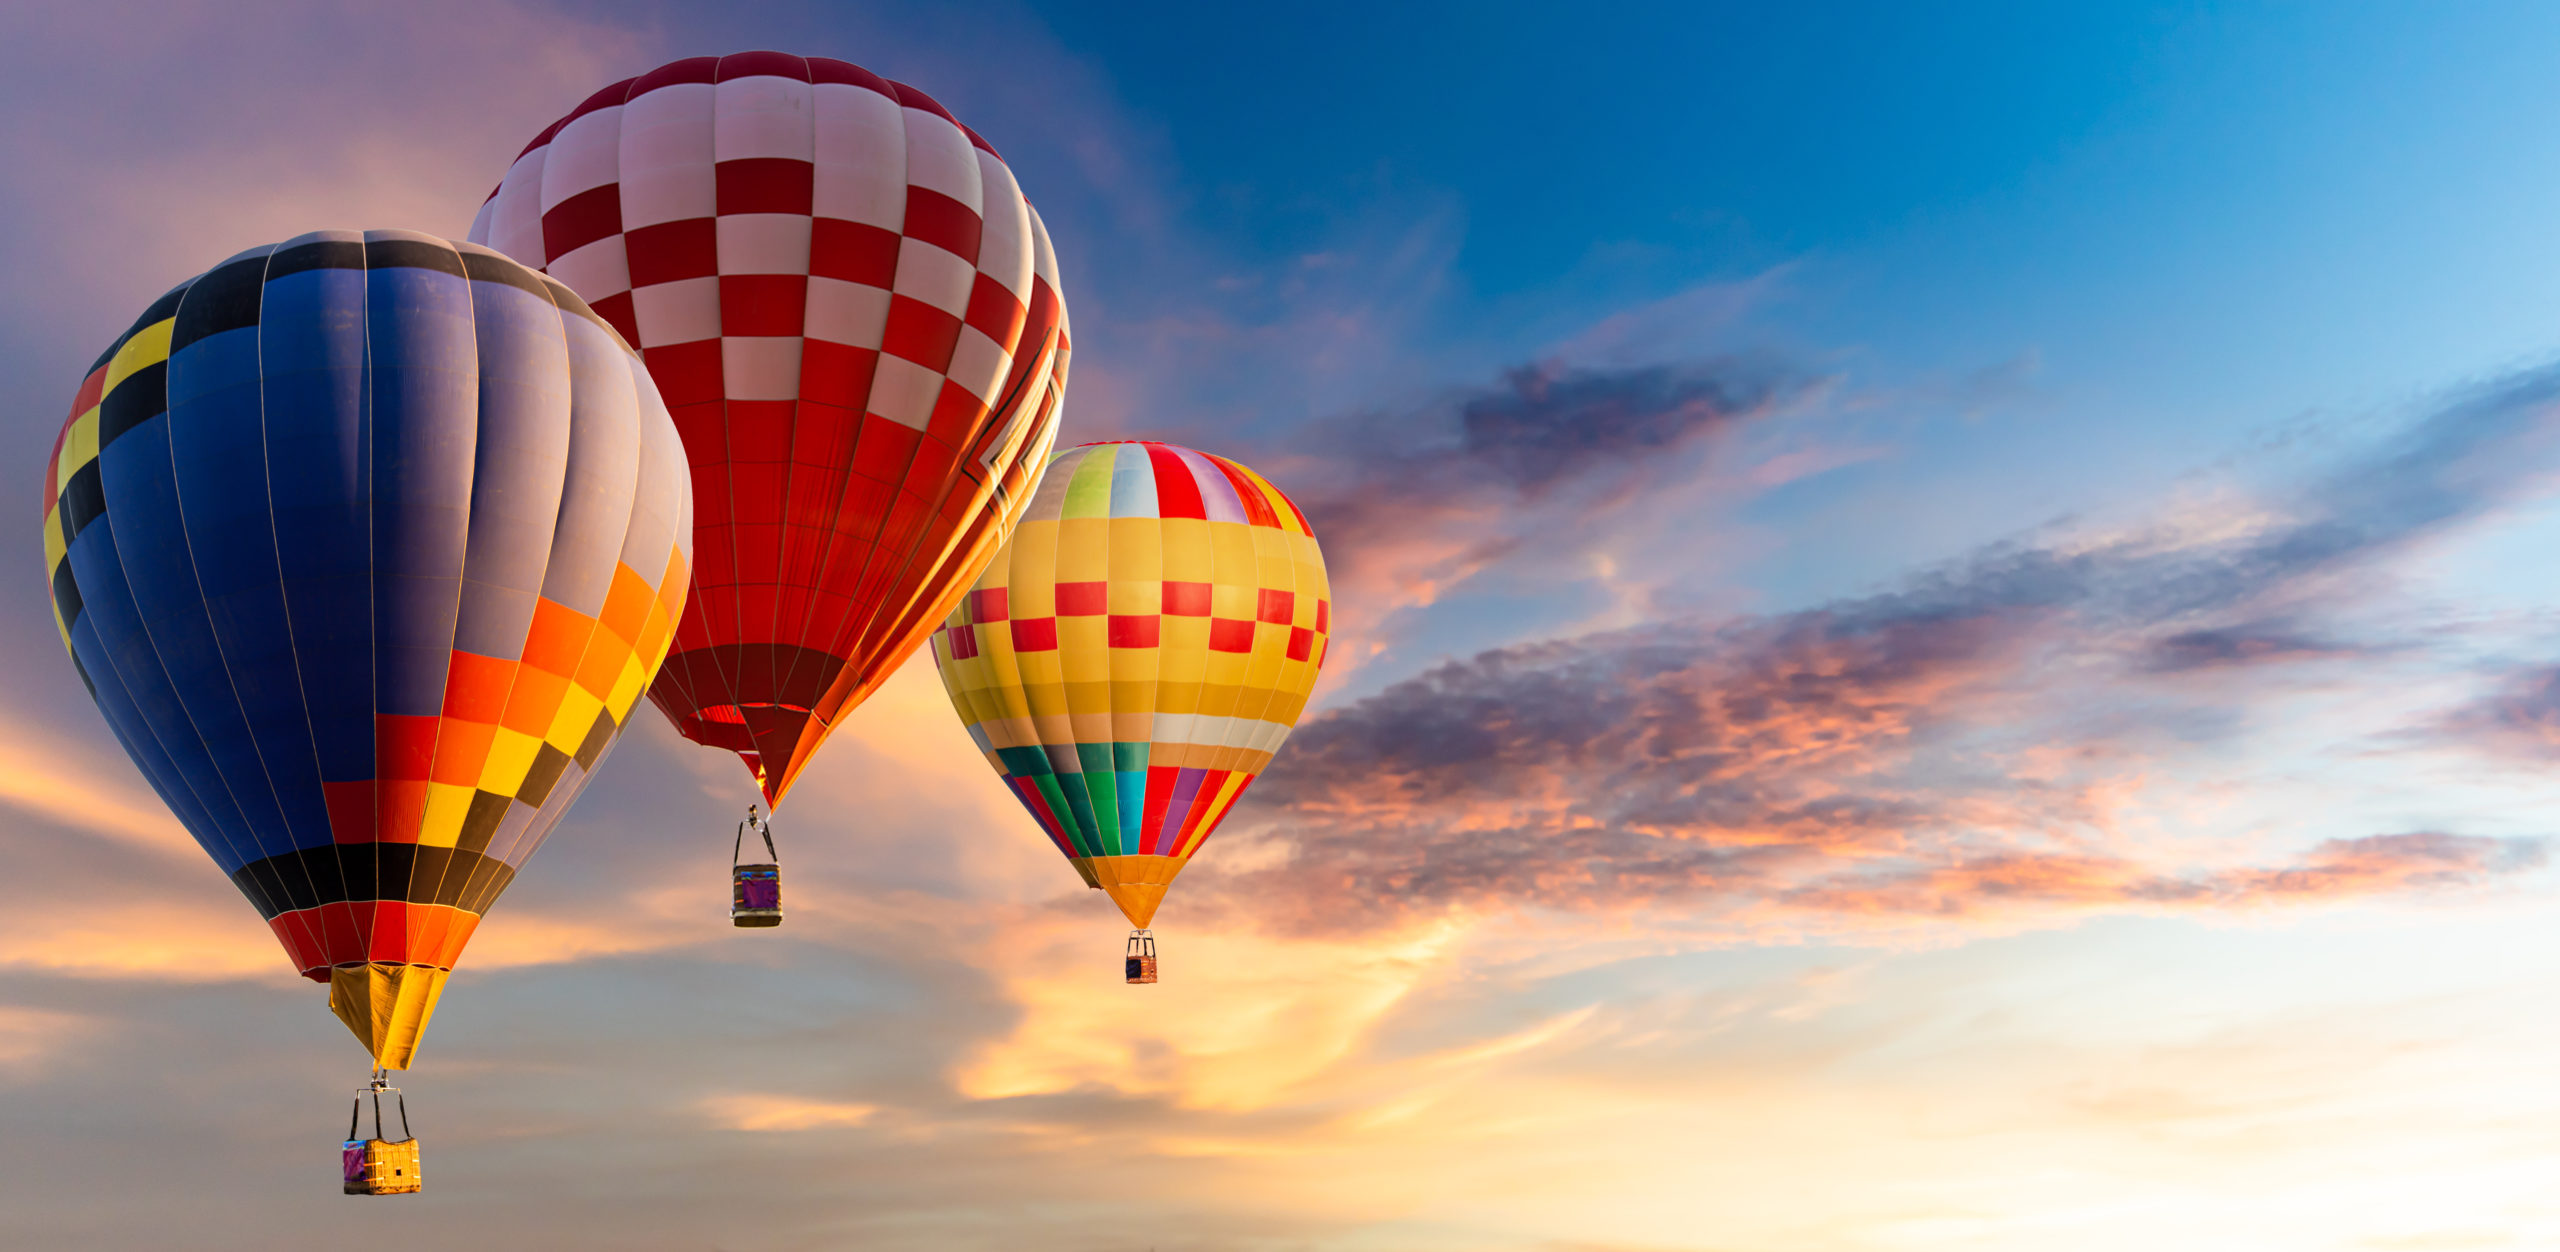 You are currently viewing Nashville Hot Air Balloon Festival